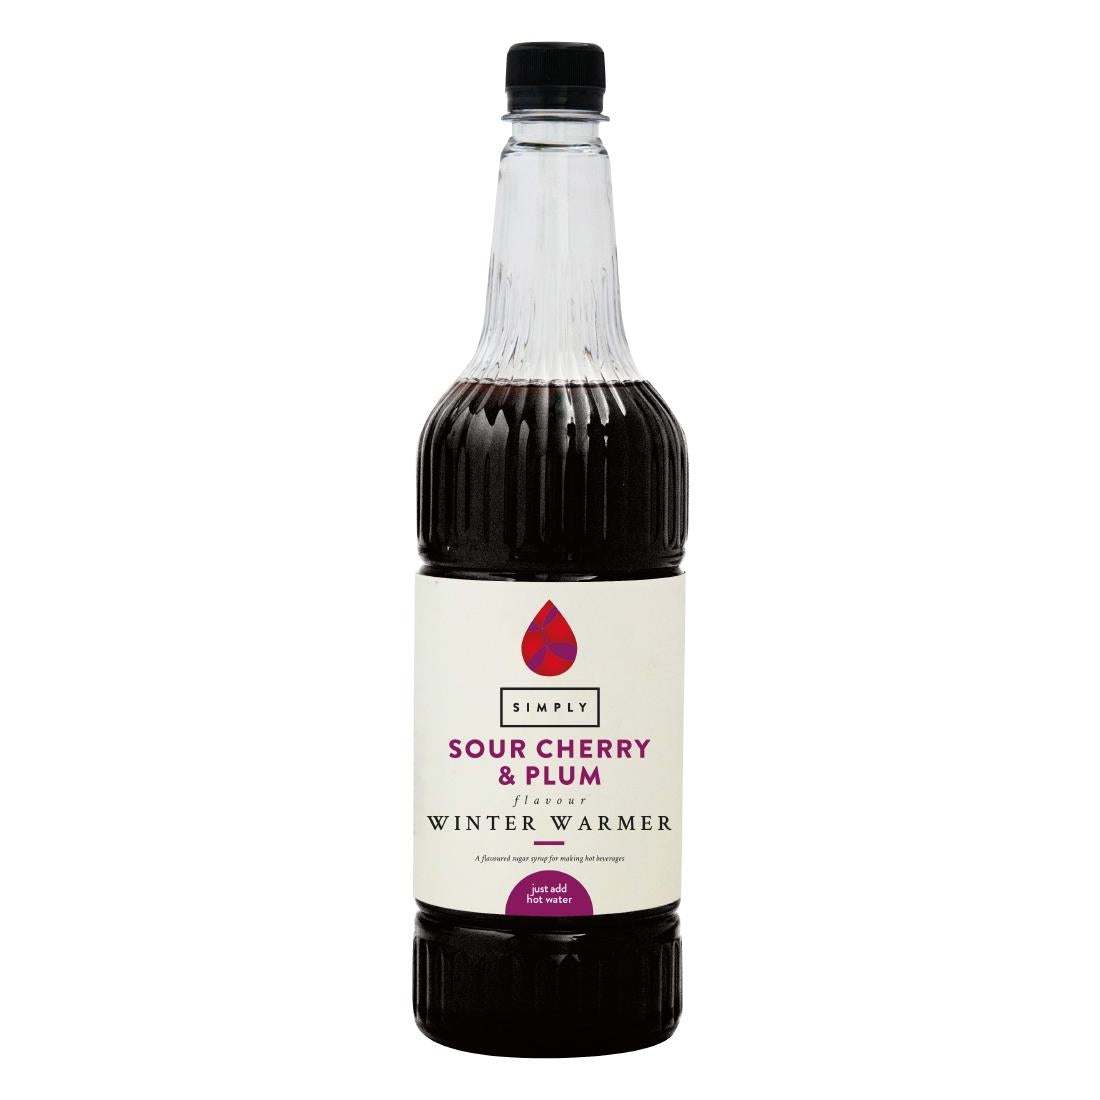 HT801 Simply Winter Warmer Sour Cherry & Plum Syrup 1Ltr